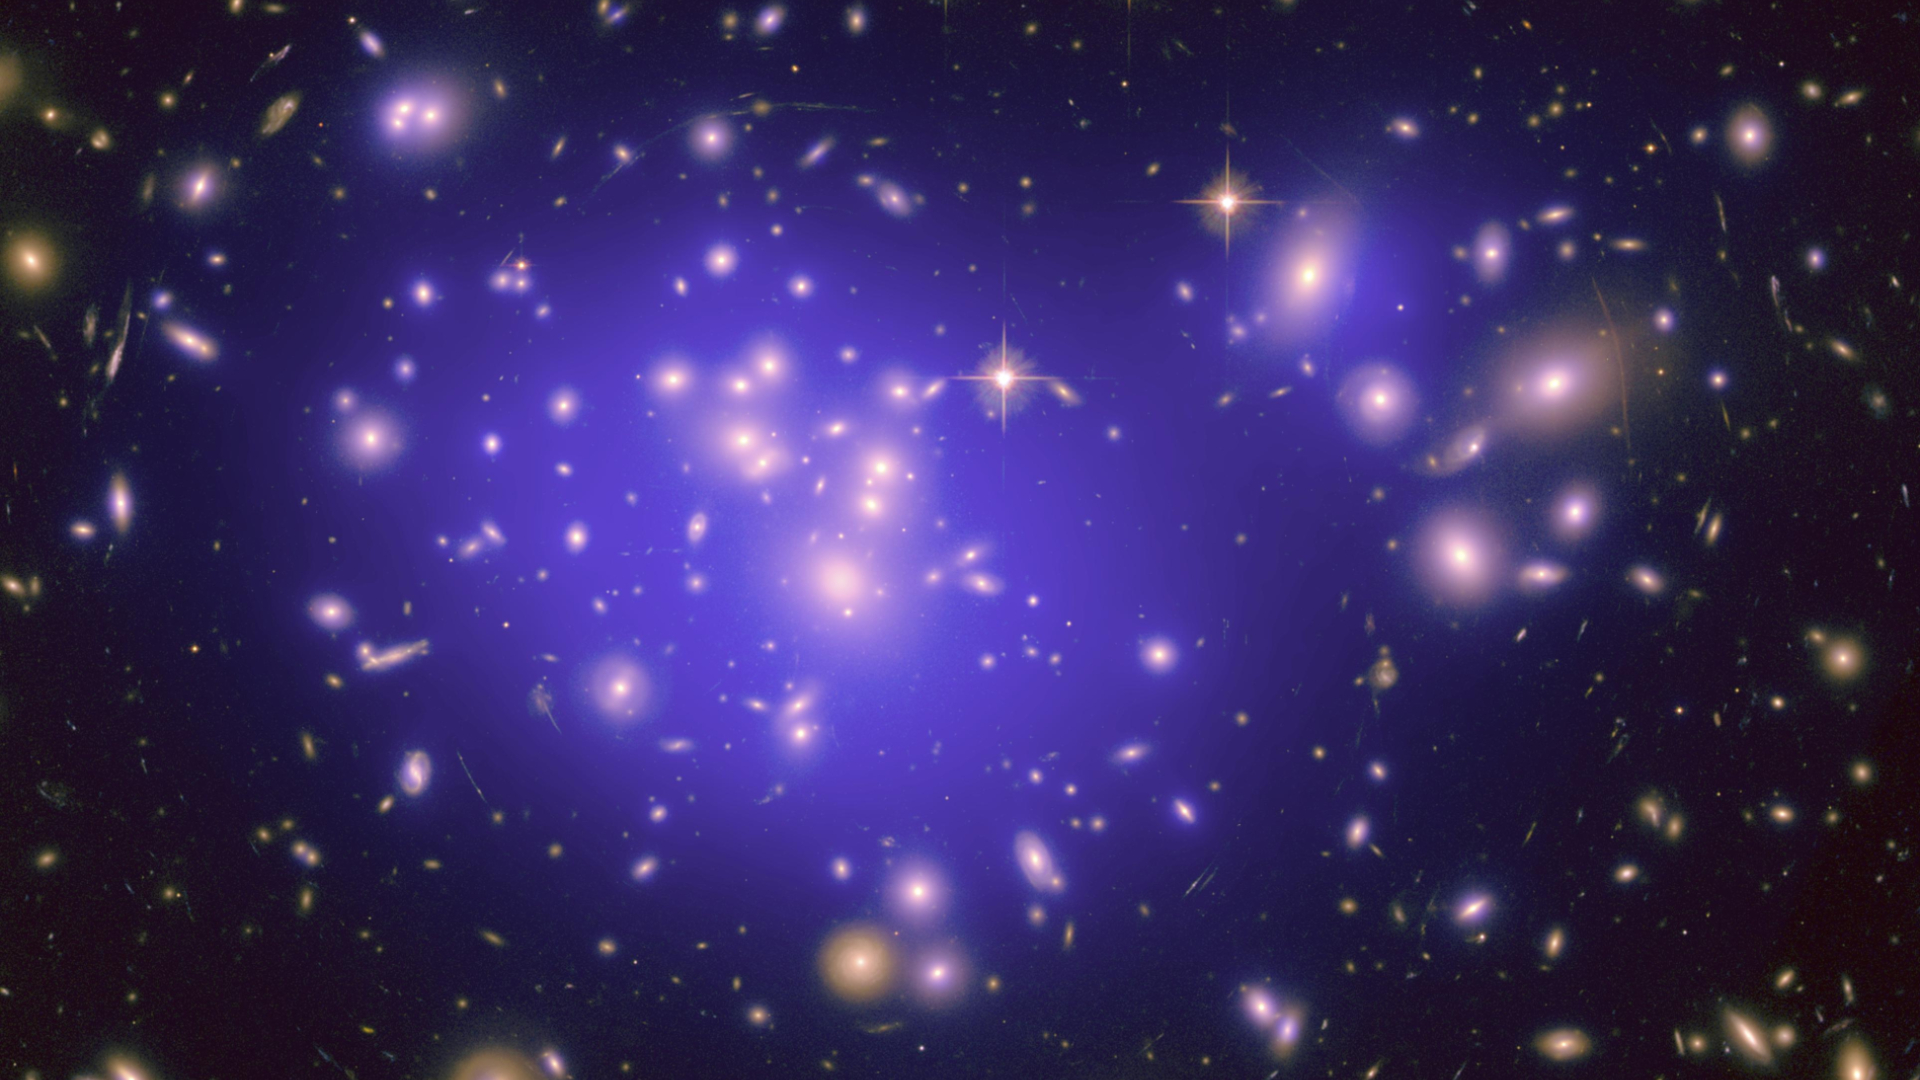 This image shows hundreds of galaxies and a large purple 